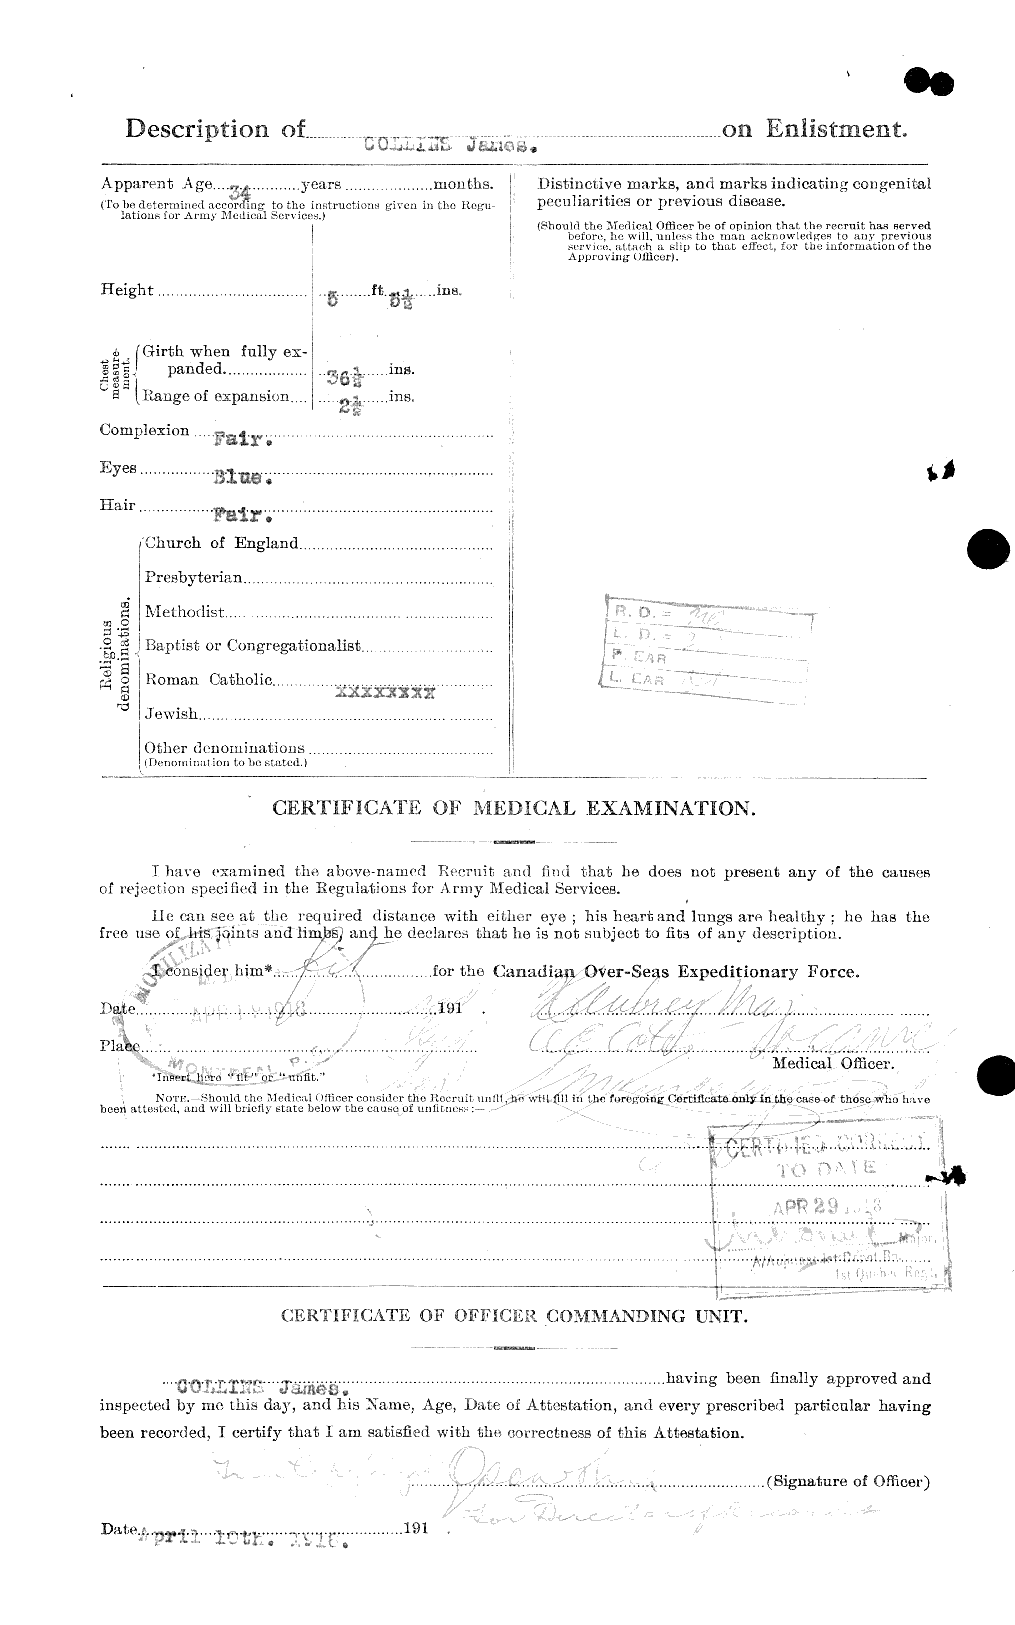 Personnel Records of the First World War - CEF 037907b